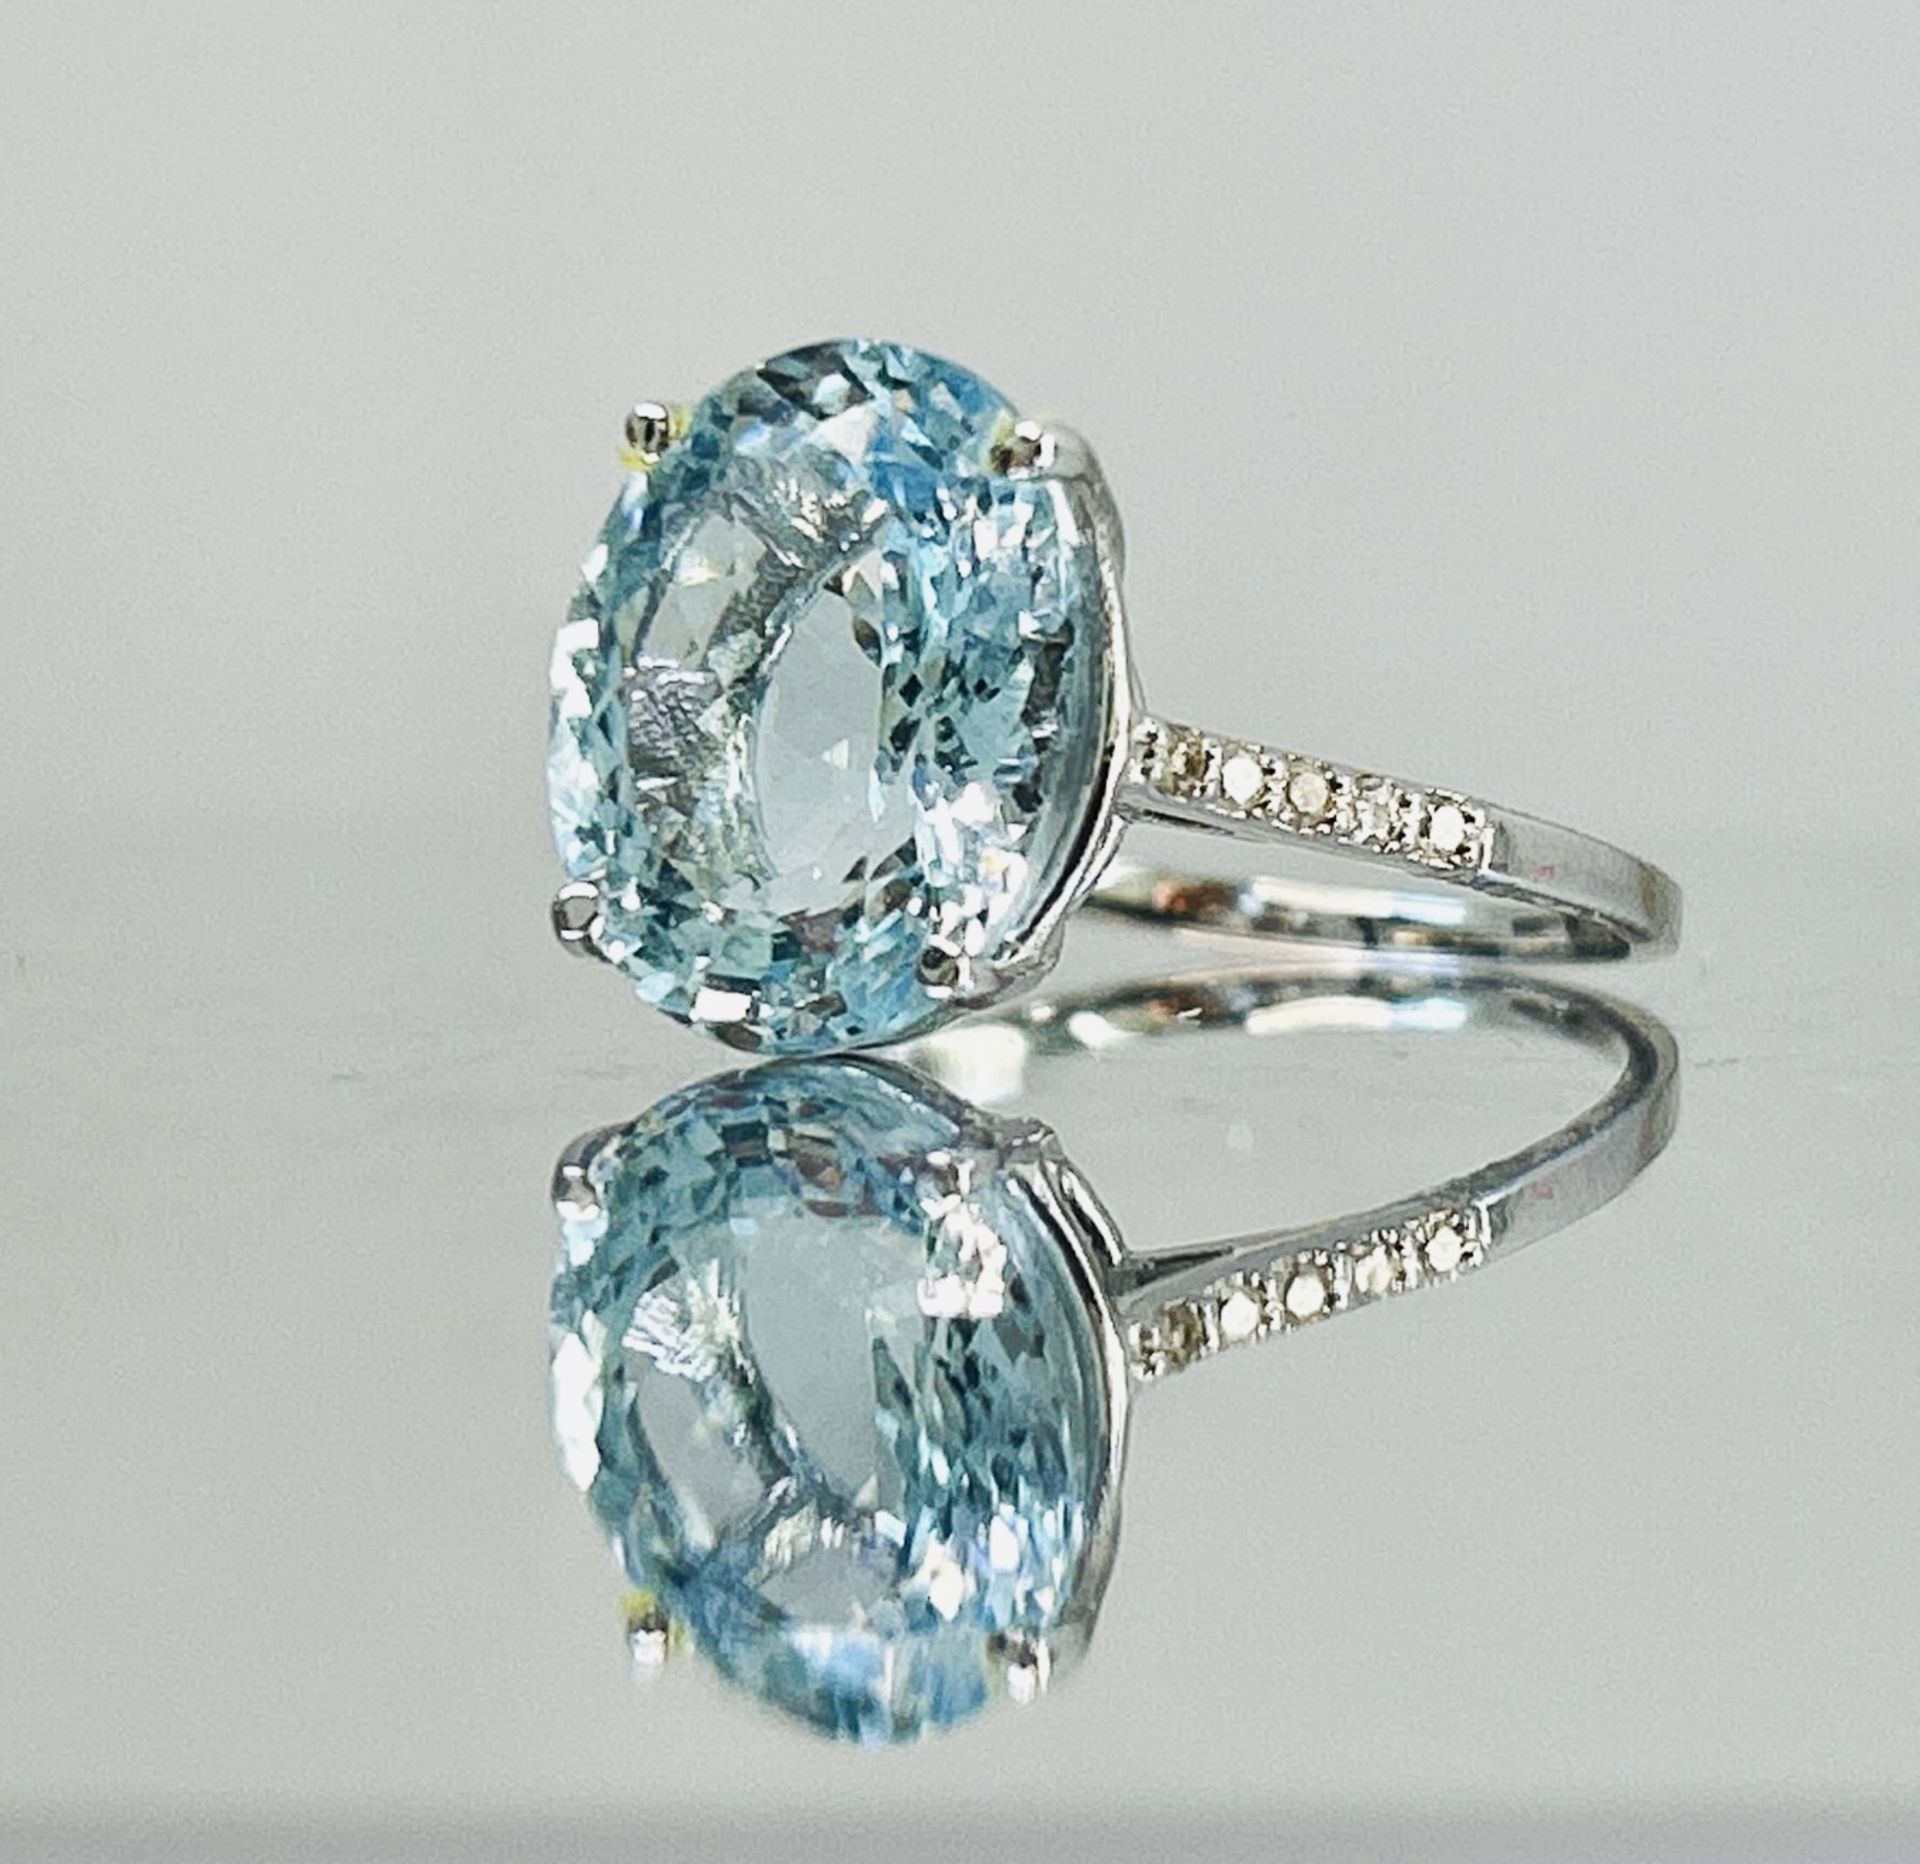 Beautiful Natural Flawless 5.81CT Aquamarine Ring With Diamonds and 18k Gold - Image 3 of 6